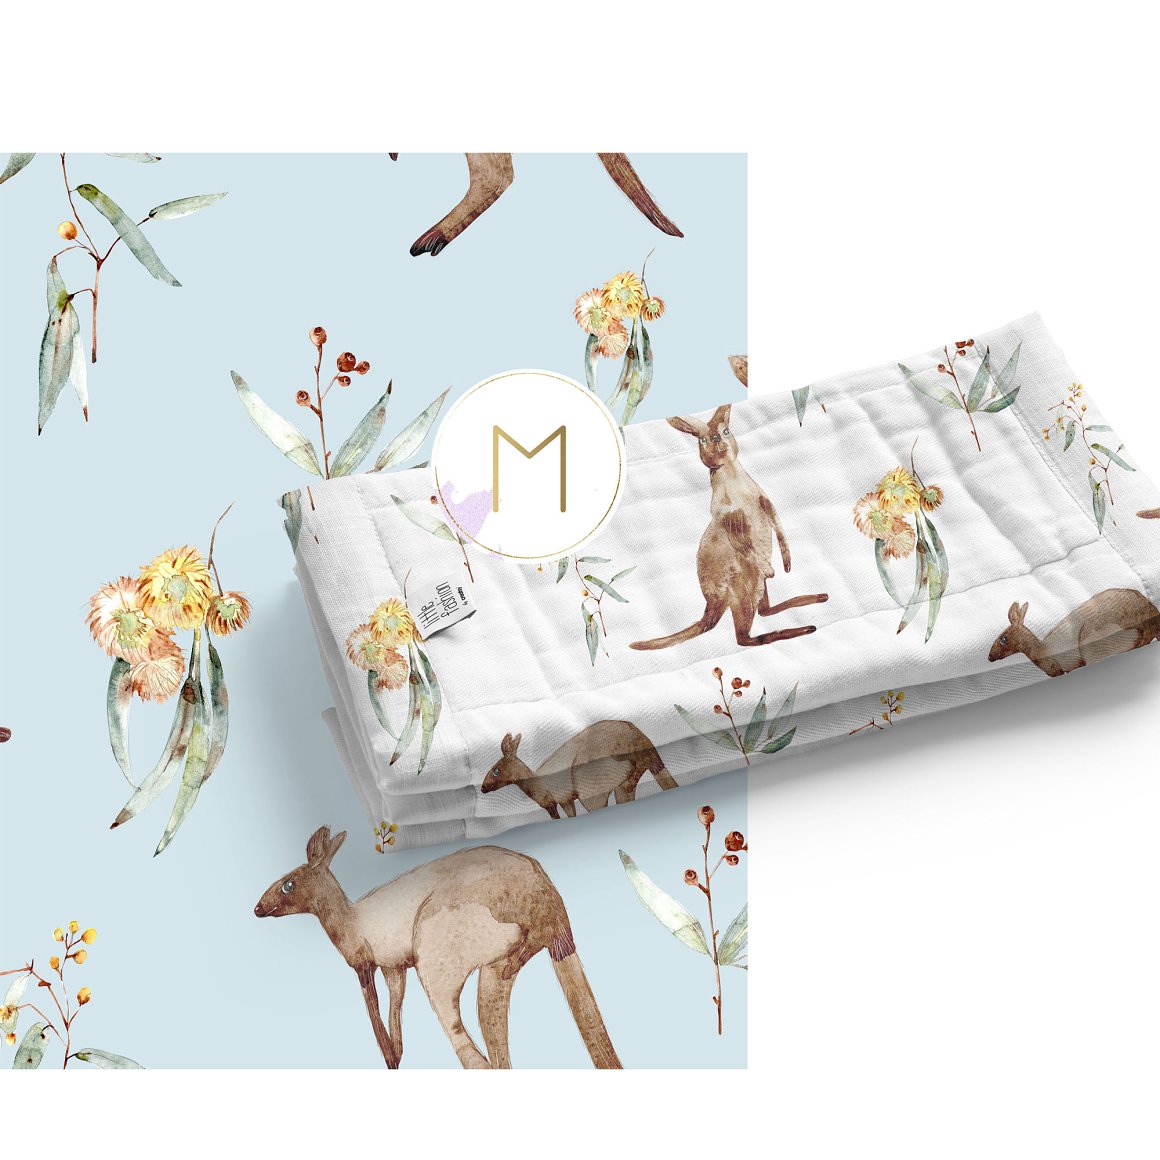 White label with the letter "M" and white bedding with kangaroo and flowers on a light blue background with the same print.